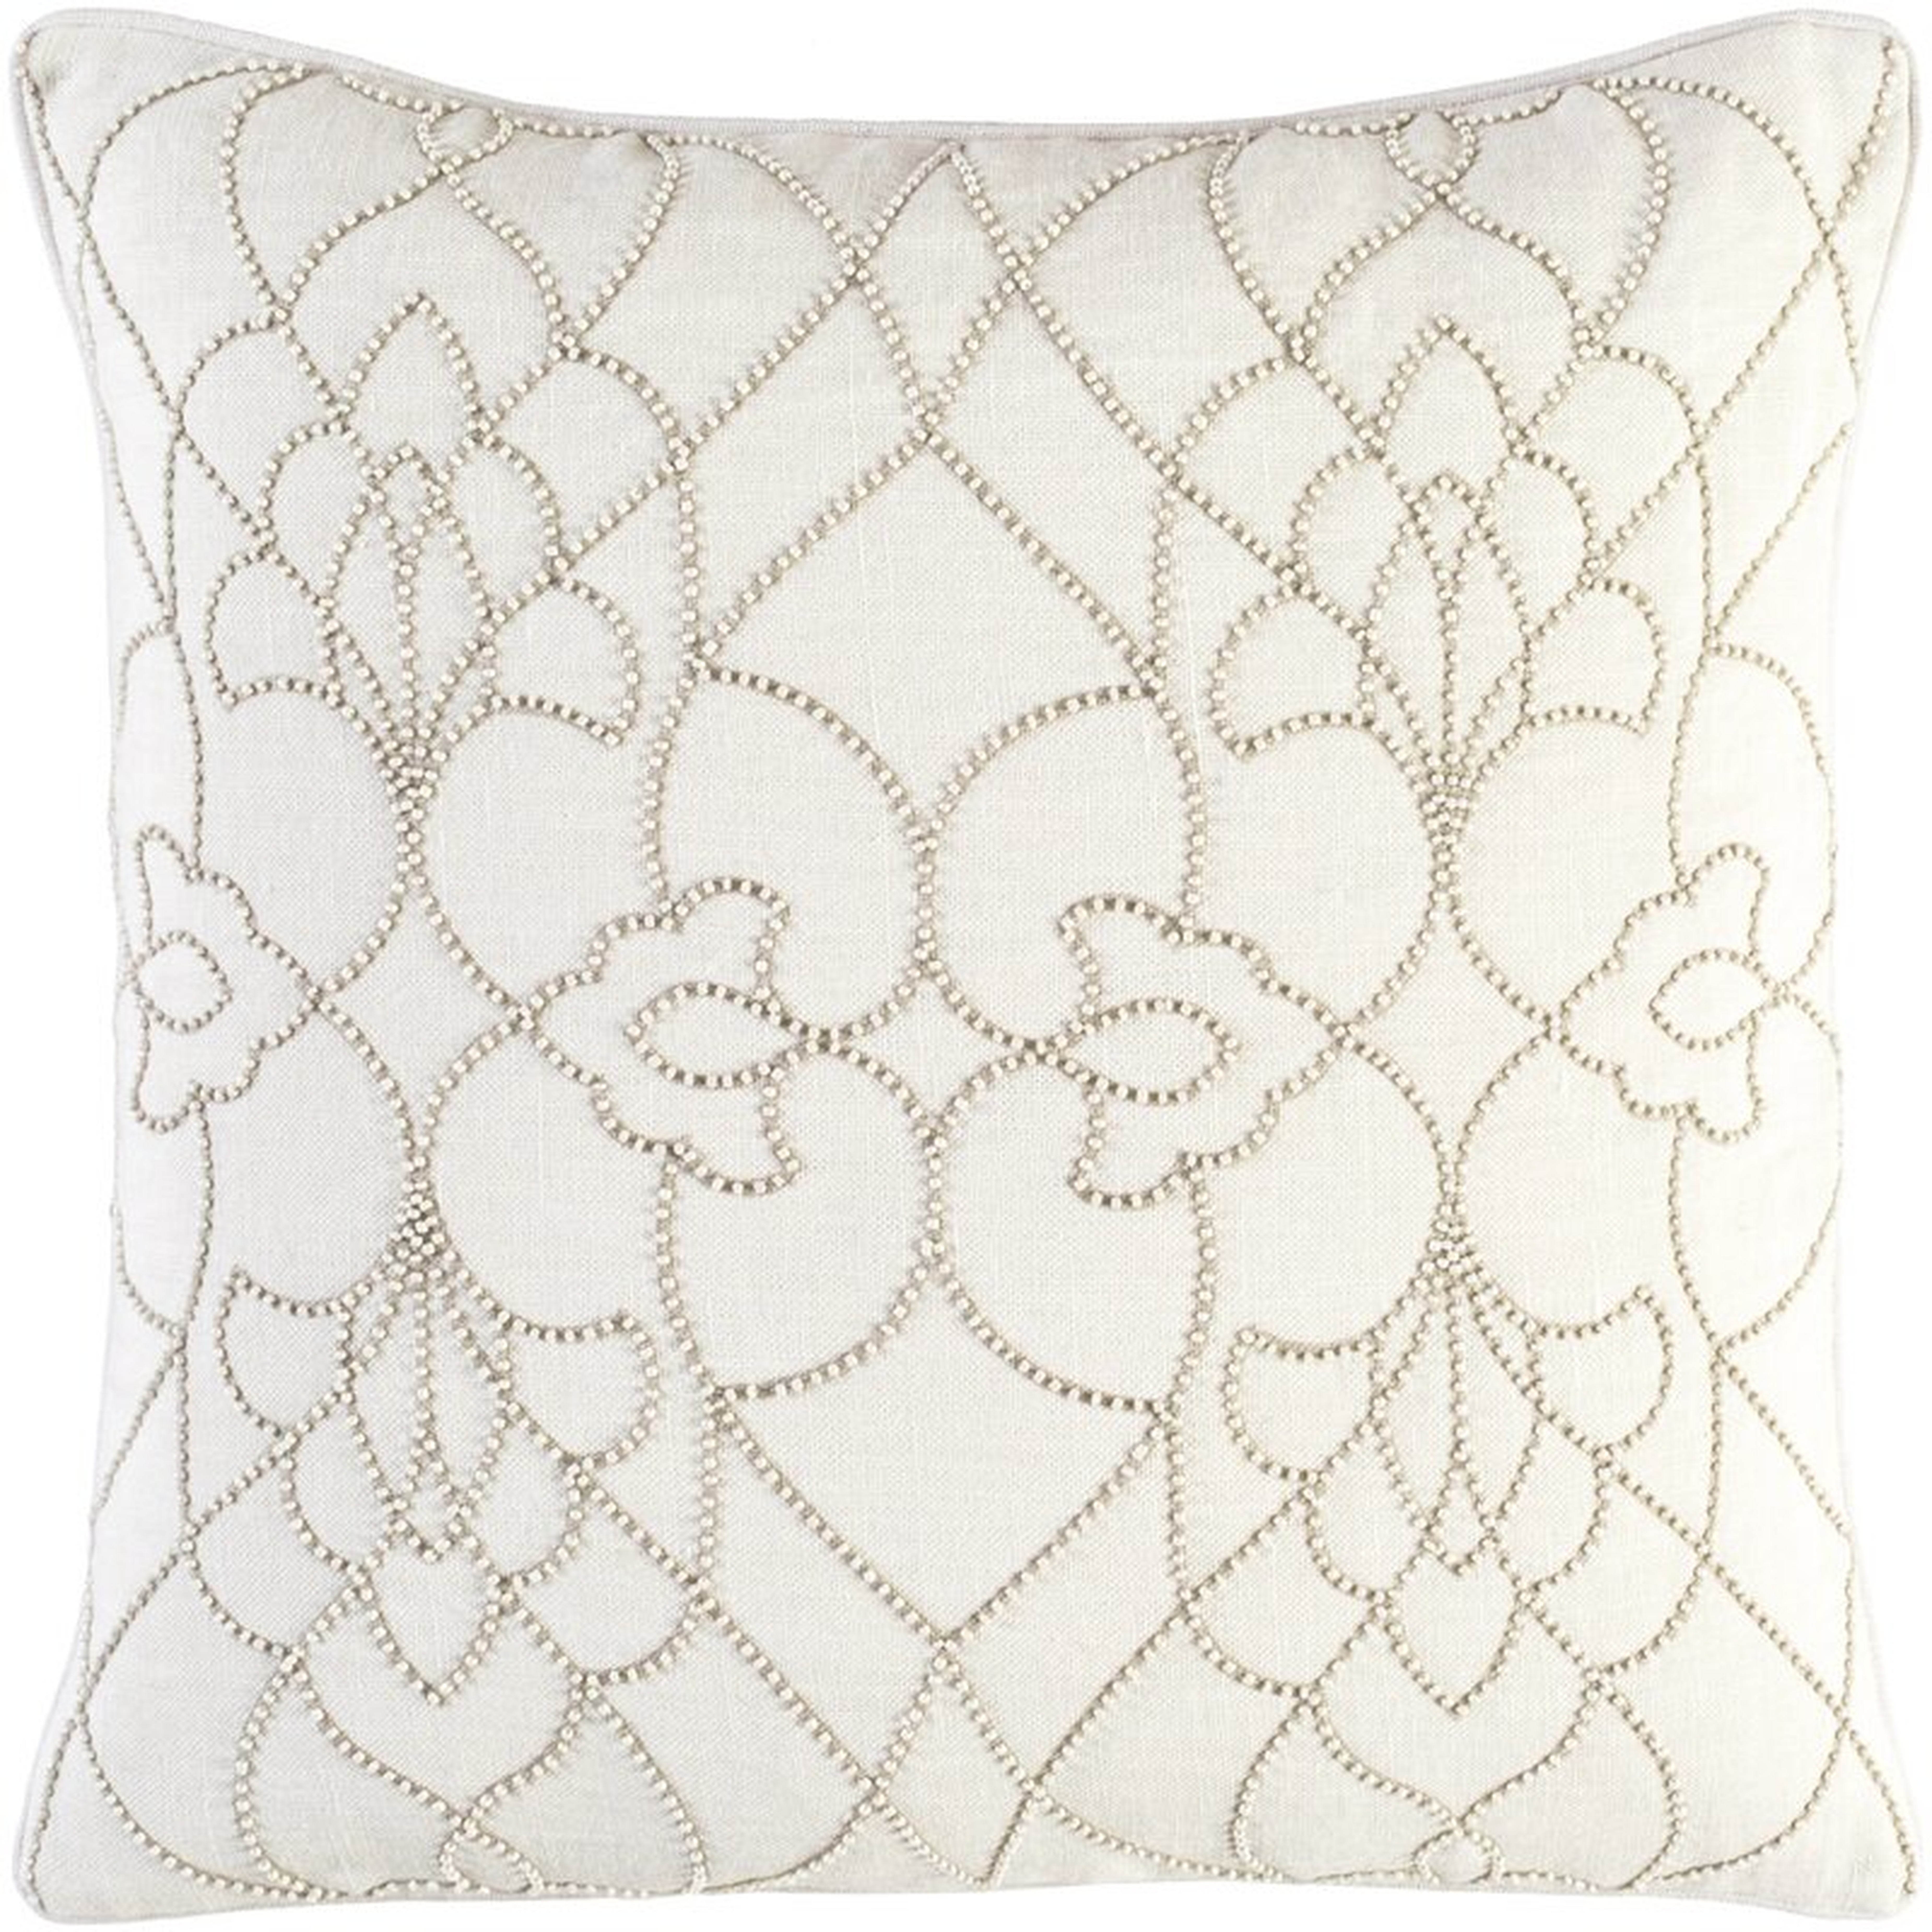 Dotted Pirouette Linen Floral Throw Pillow in Cream - 18" - Perigold